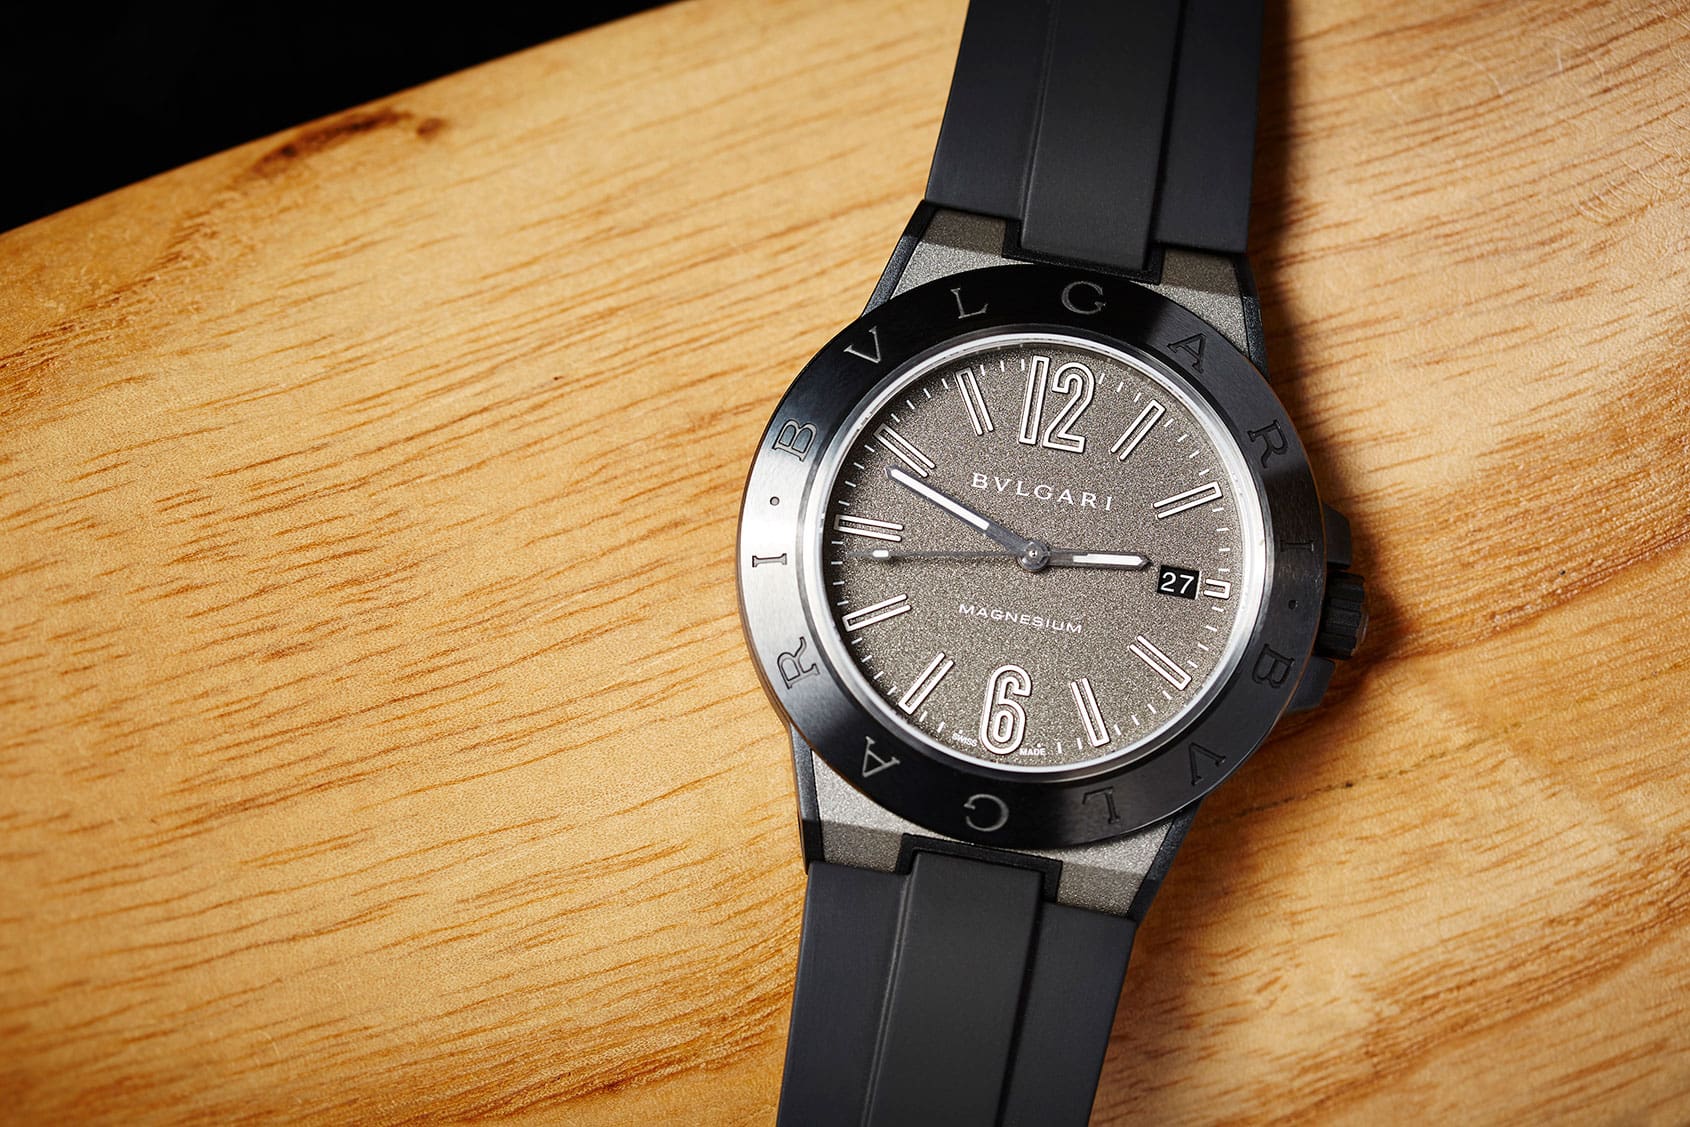 EDITOR’S PICK: Bulgari defies expectations with its high-tech Diagono Magnesium